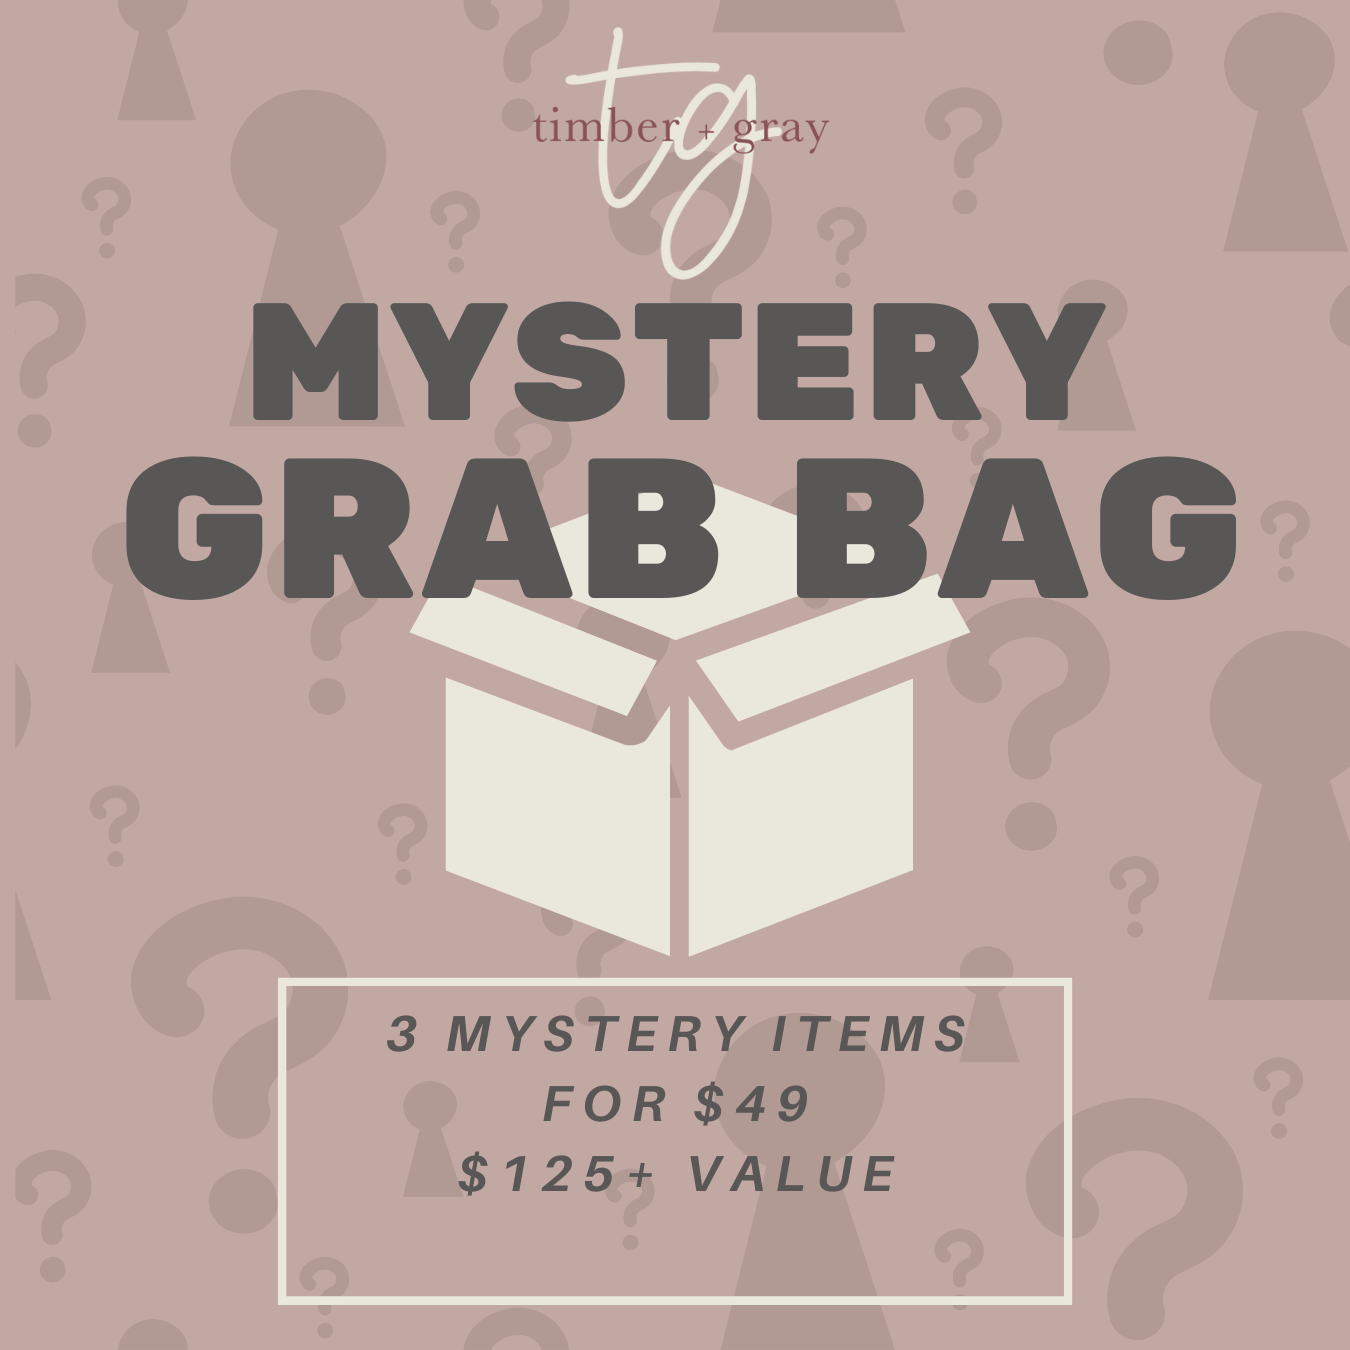 3 Mystery Items for $49 ($125+ value)